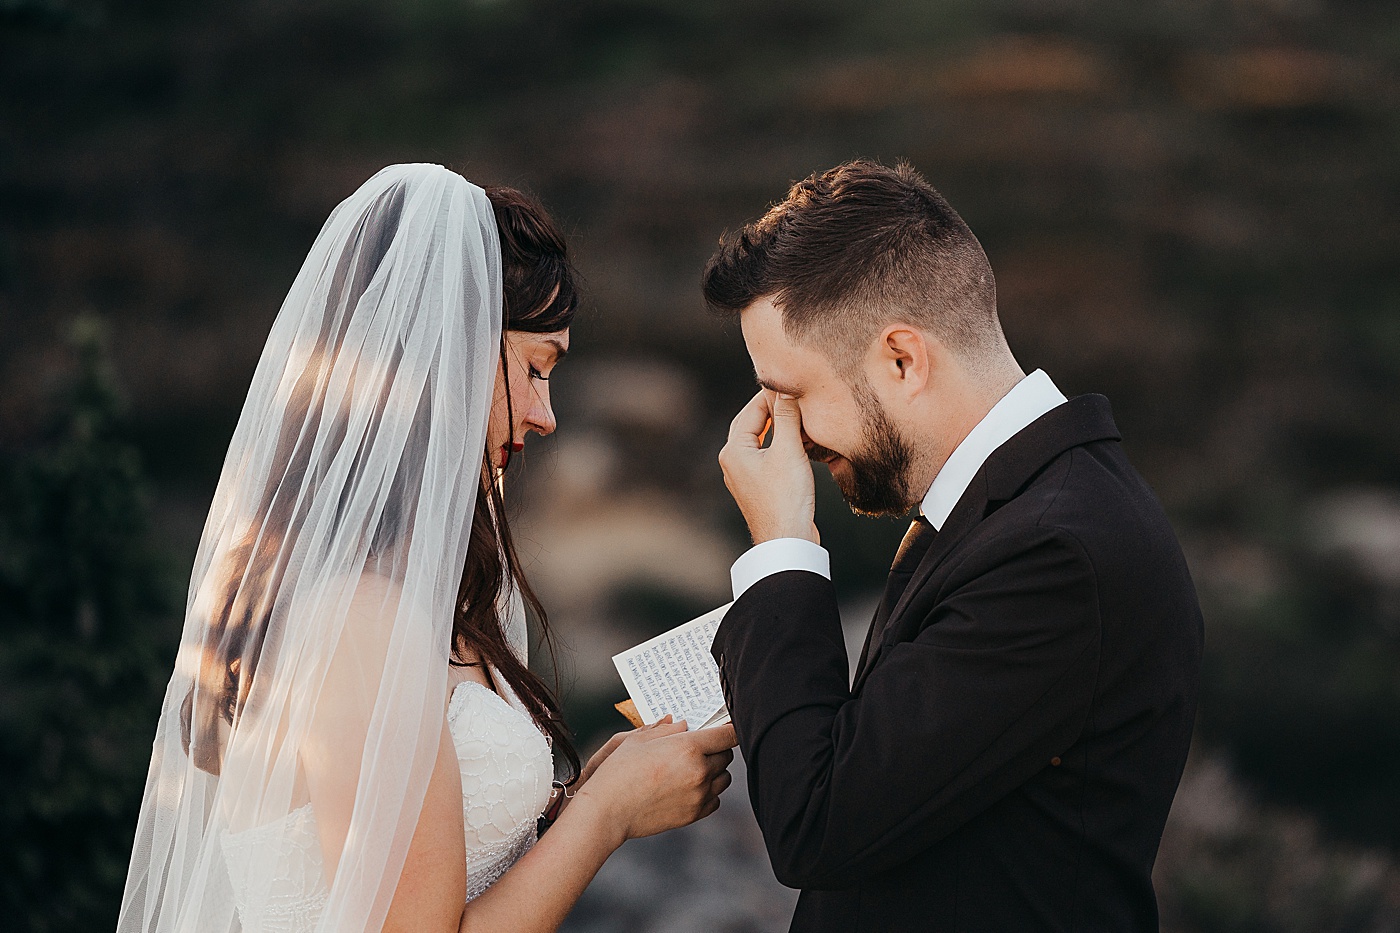 Groom wipes tears as bride reads vows | Photo by Megan Montalvo Photography